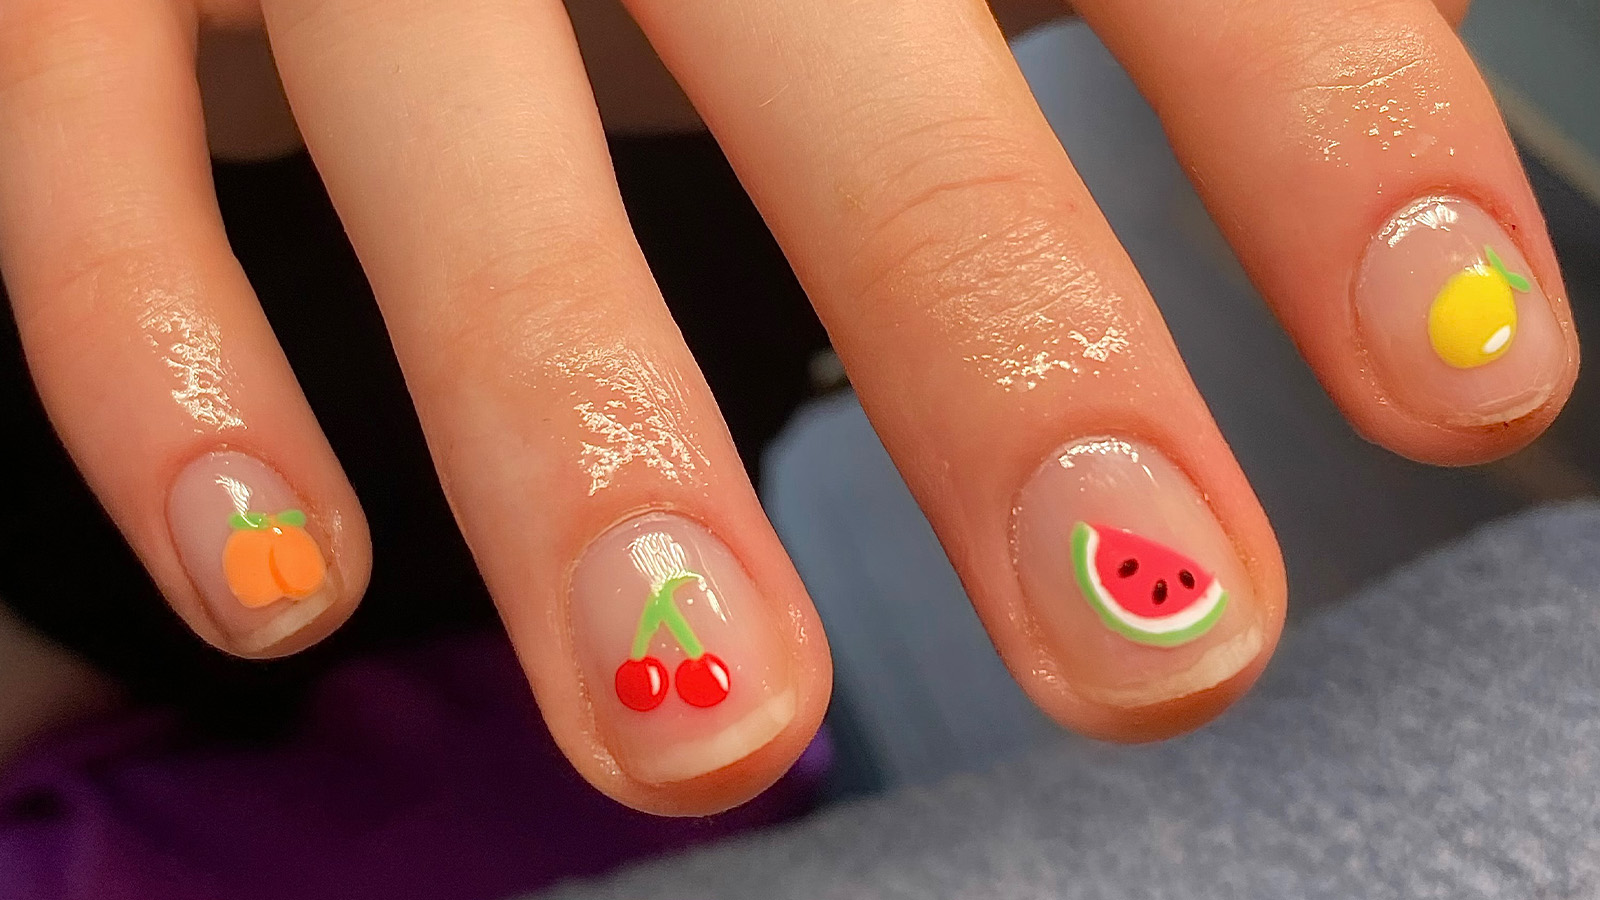 Fruit-themed nails of a woman